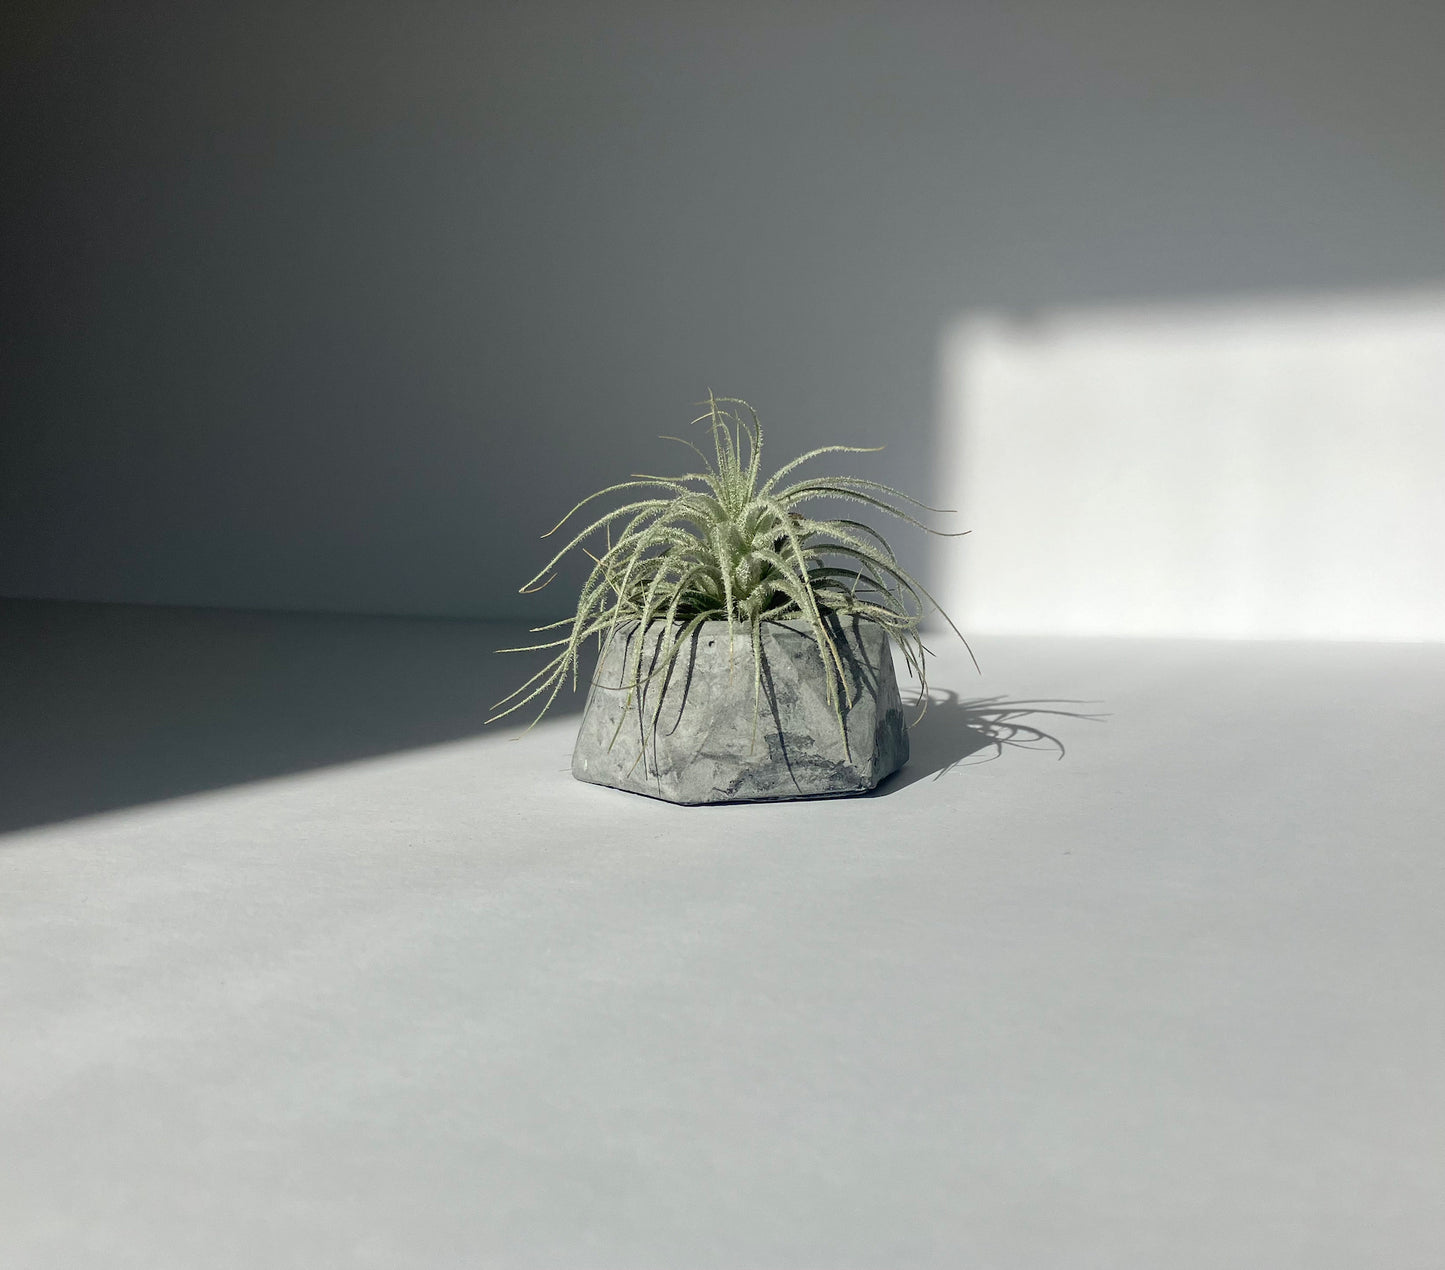 Firmly Planted - Concrete Planter and Air Plant